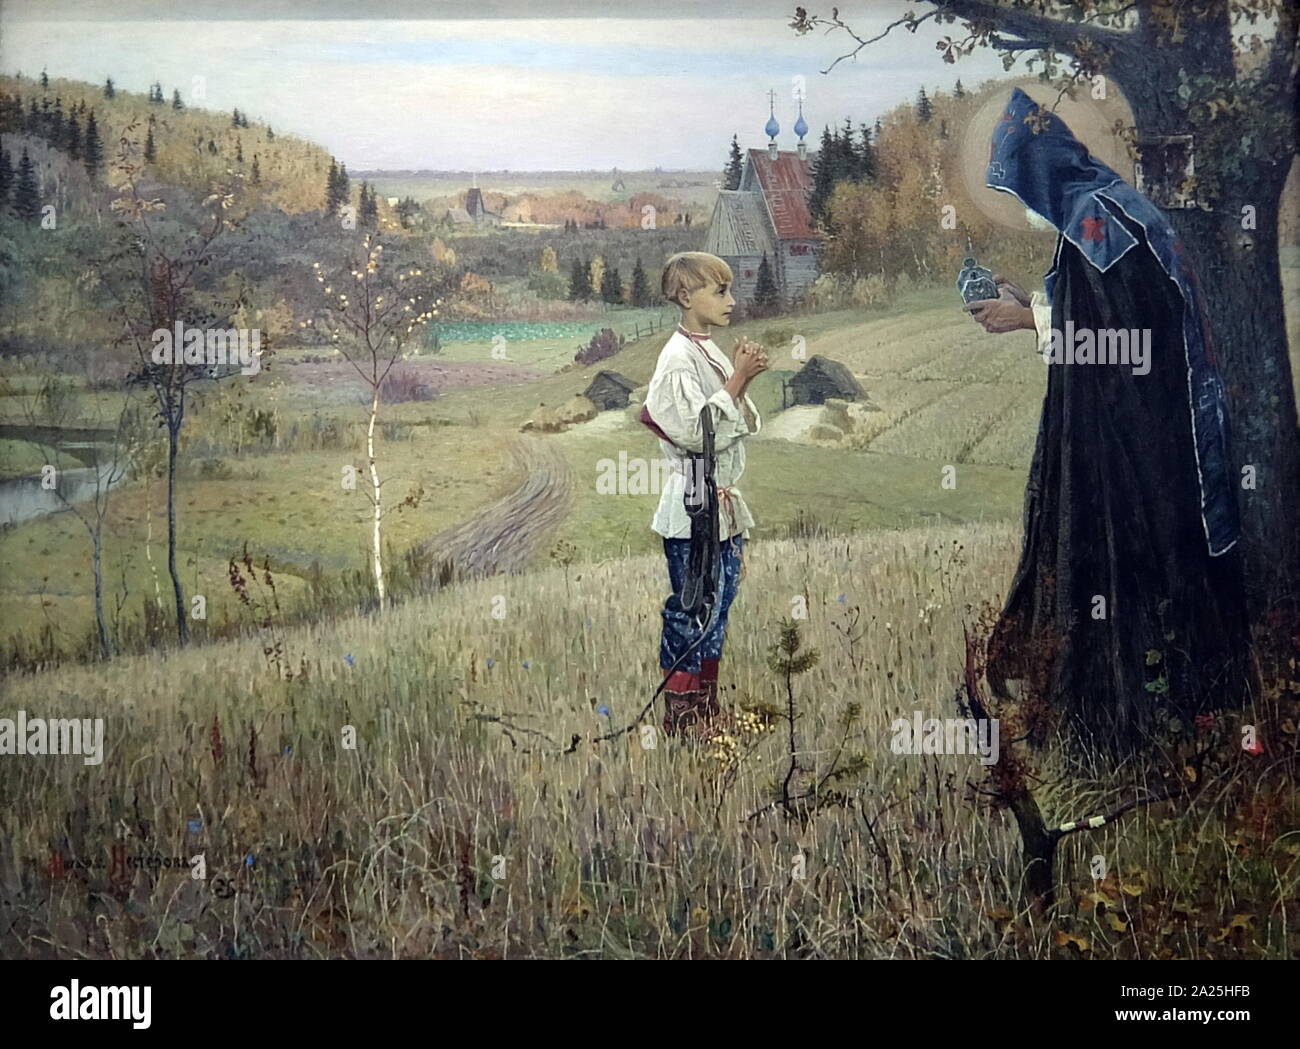 Painting titled 'Vision to the Youth Bartholomew' by Mikhail Nesterov. Mikhail Vasilyevich Nesterov (1862-1942) a Russian and Soviet painter. Stock Photo